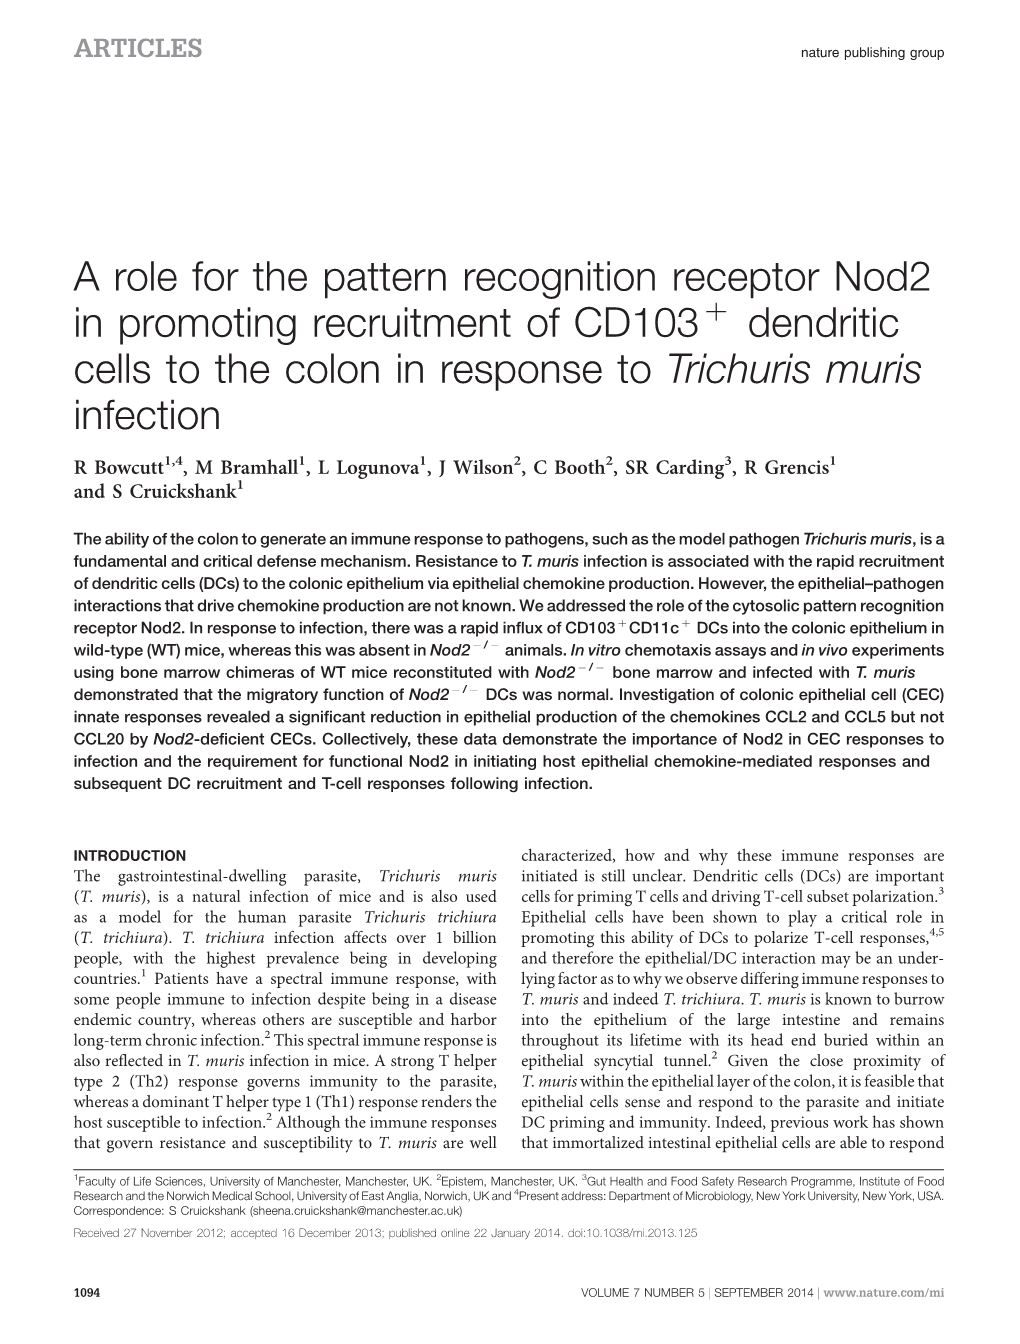 A Role for the Pattern Recognition Receptor Nod2 in Promoting Recruitment of CD103&Plus; Dendritic Cells to the Colon In